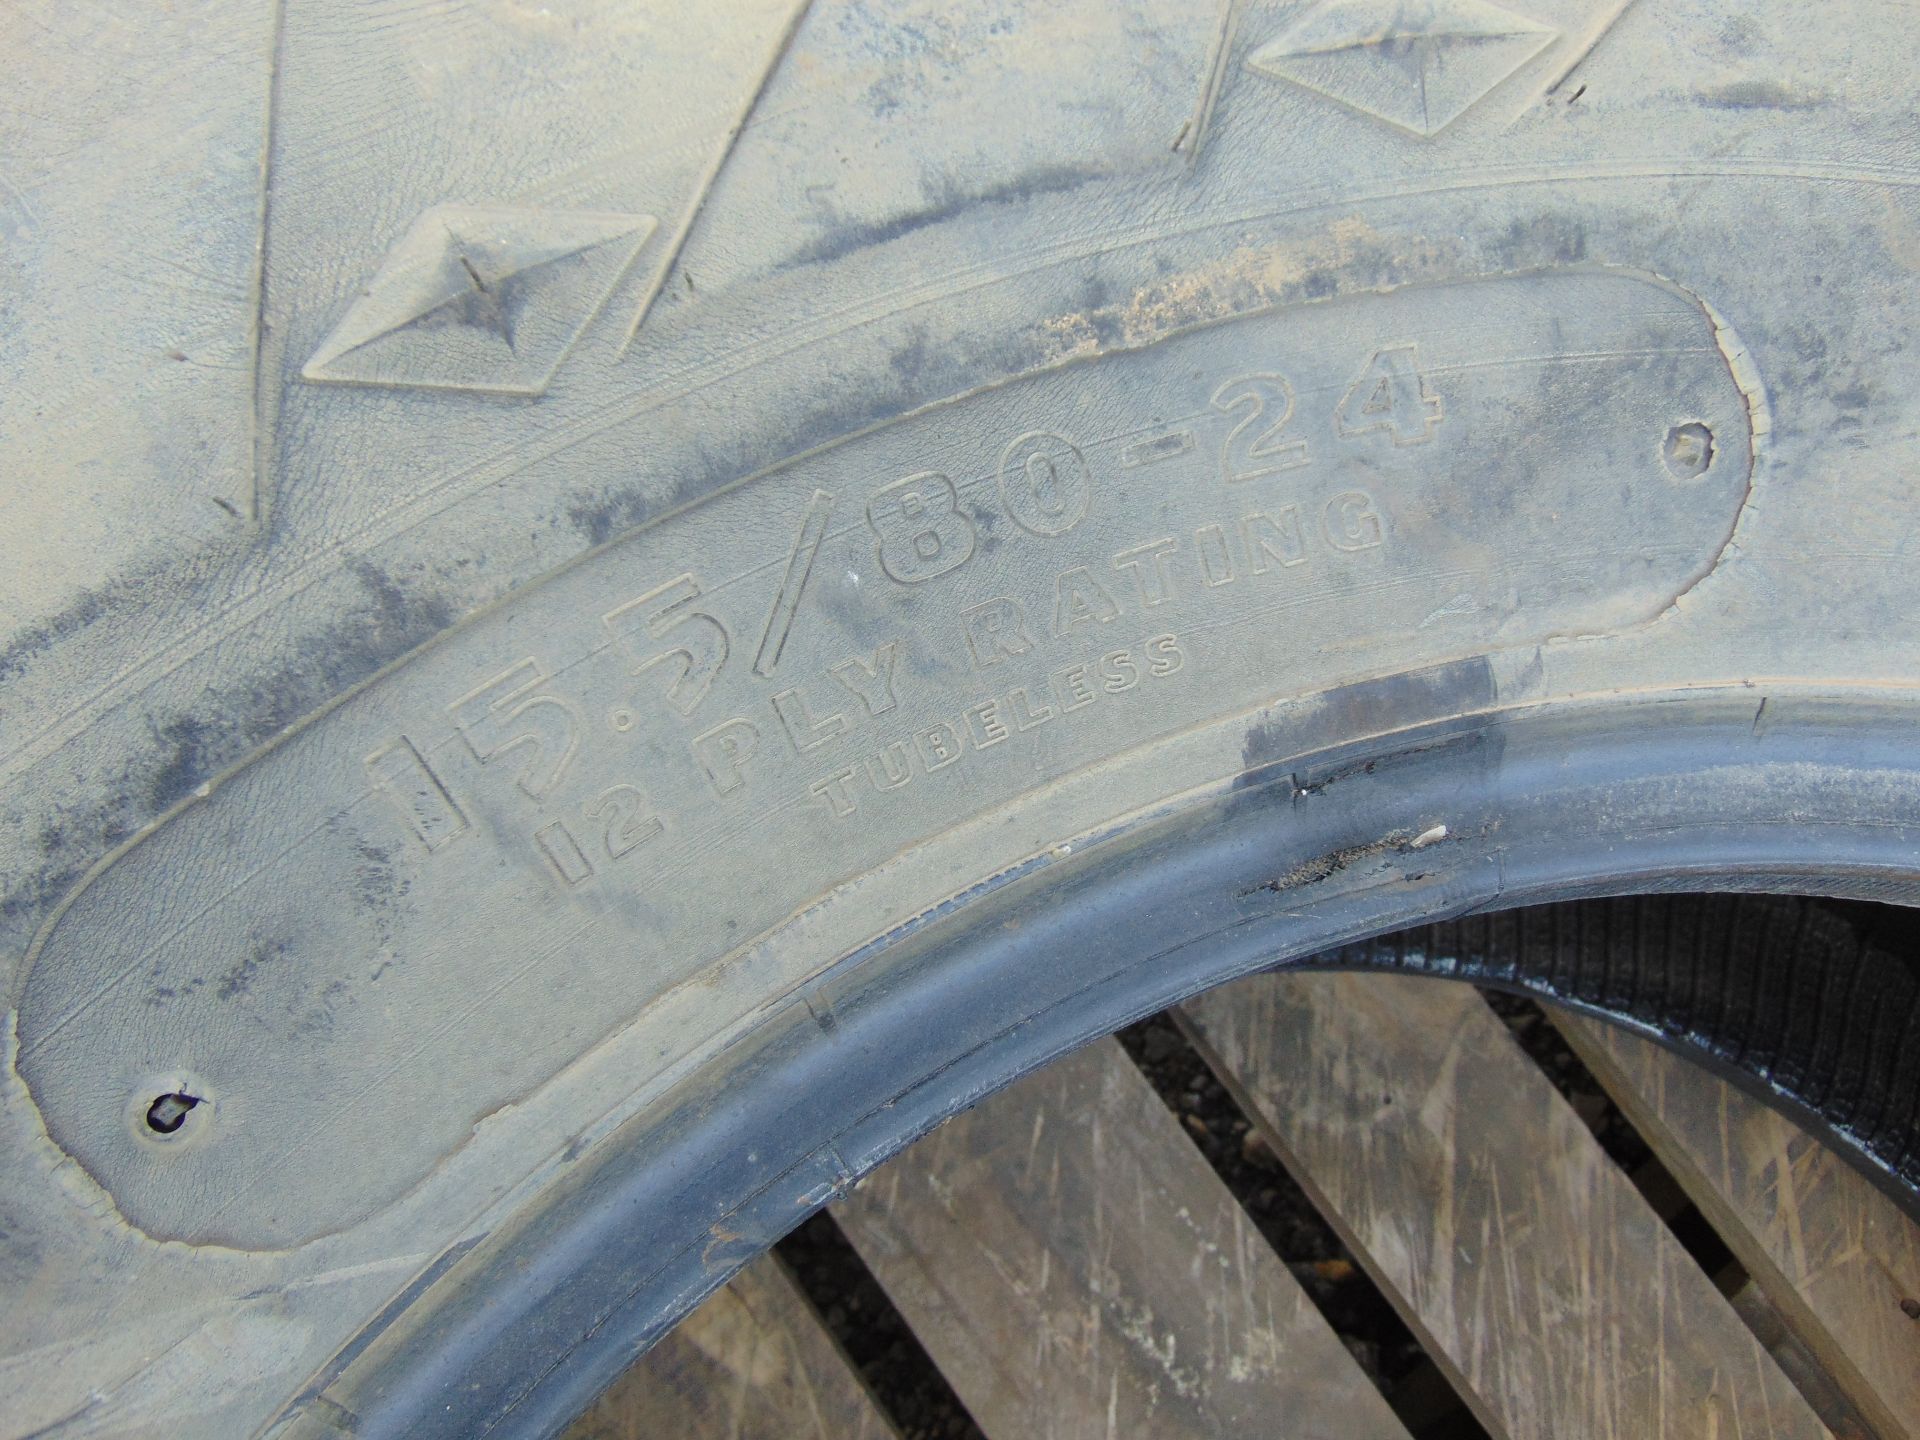 Goodyear Sure Grip 15.5/80-24 Tyre - Image 4 of 6